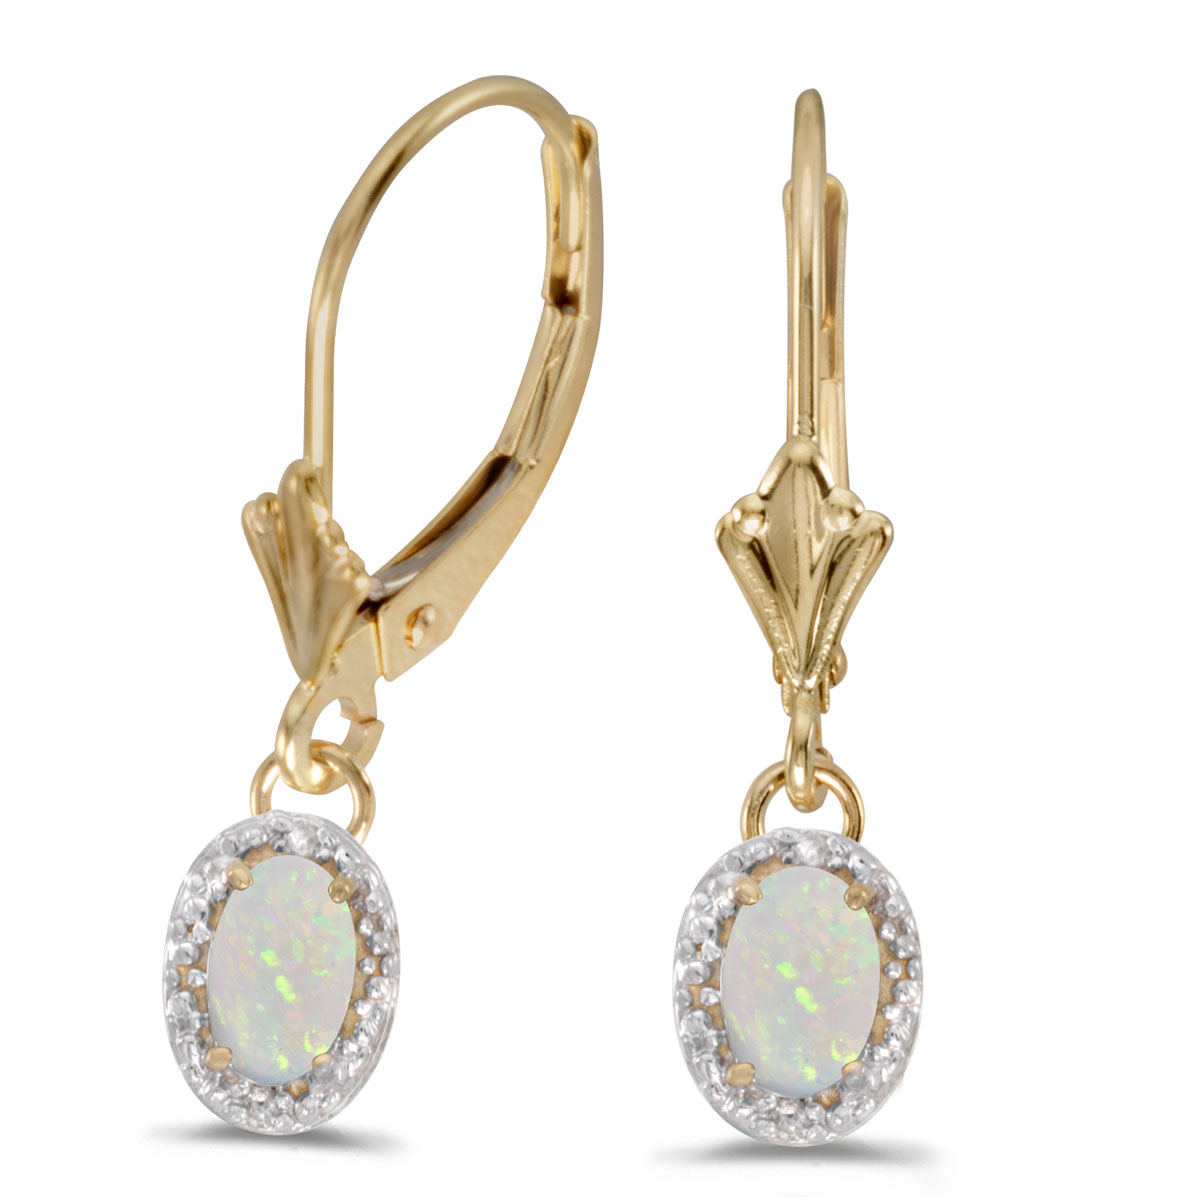 Beautiful 10k yellow gold leverback earrings with mesmerizing  6x4 mm opals complemented with bri...